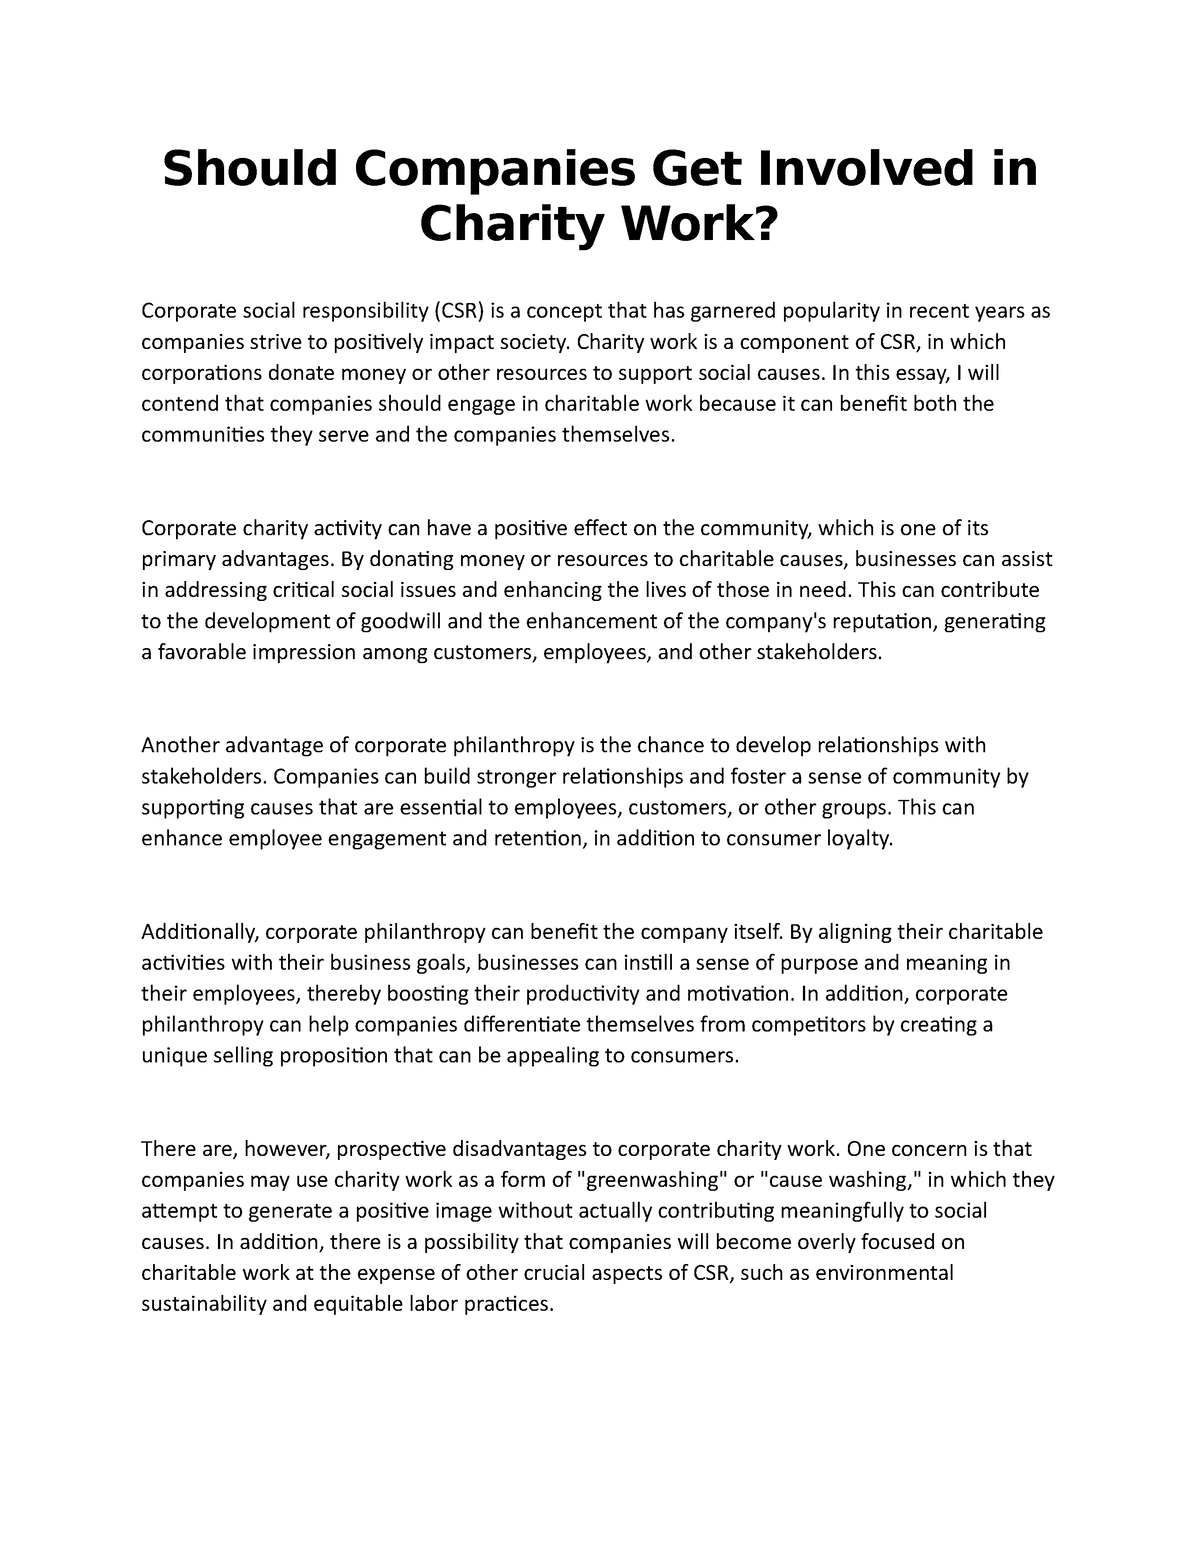 research paper topics about charity